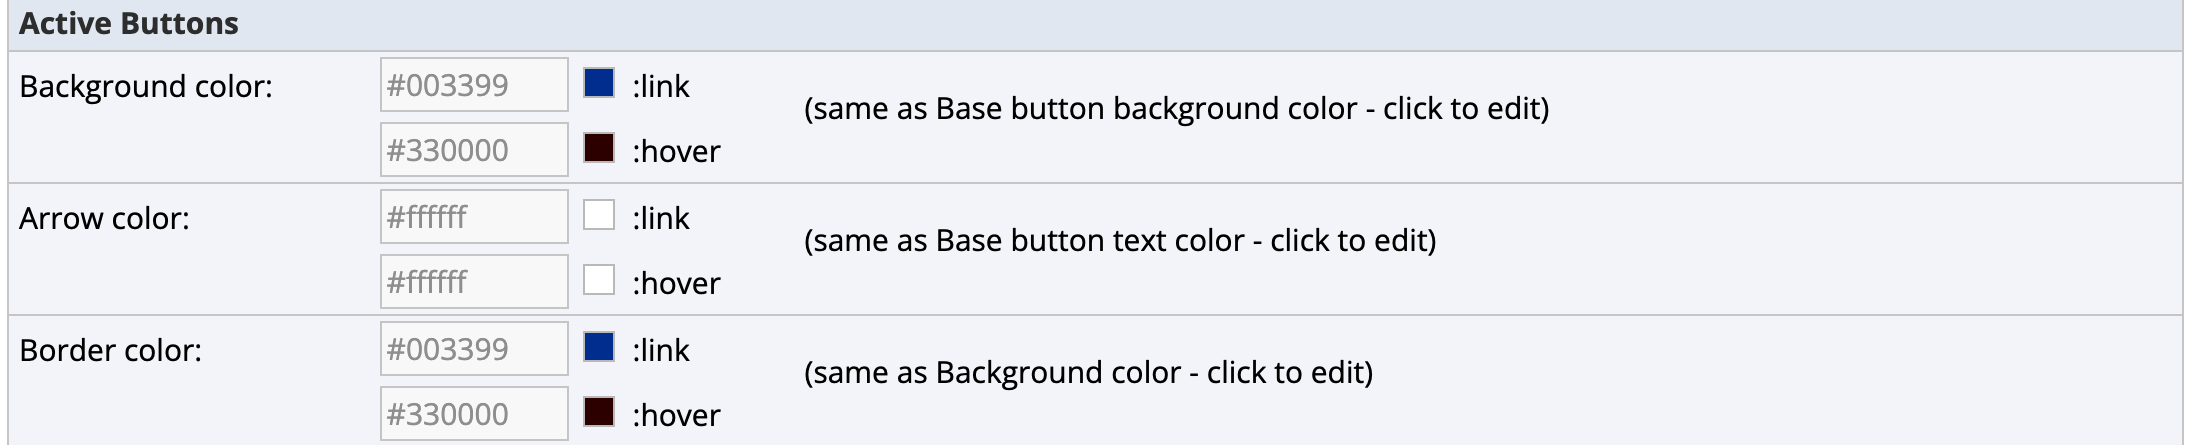 Active buttons settings